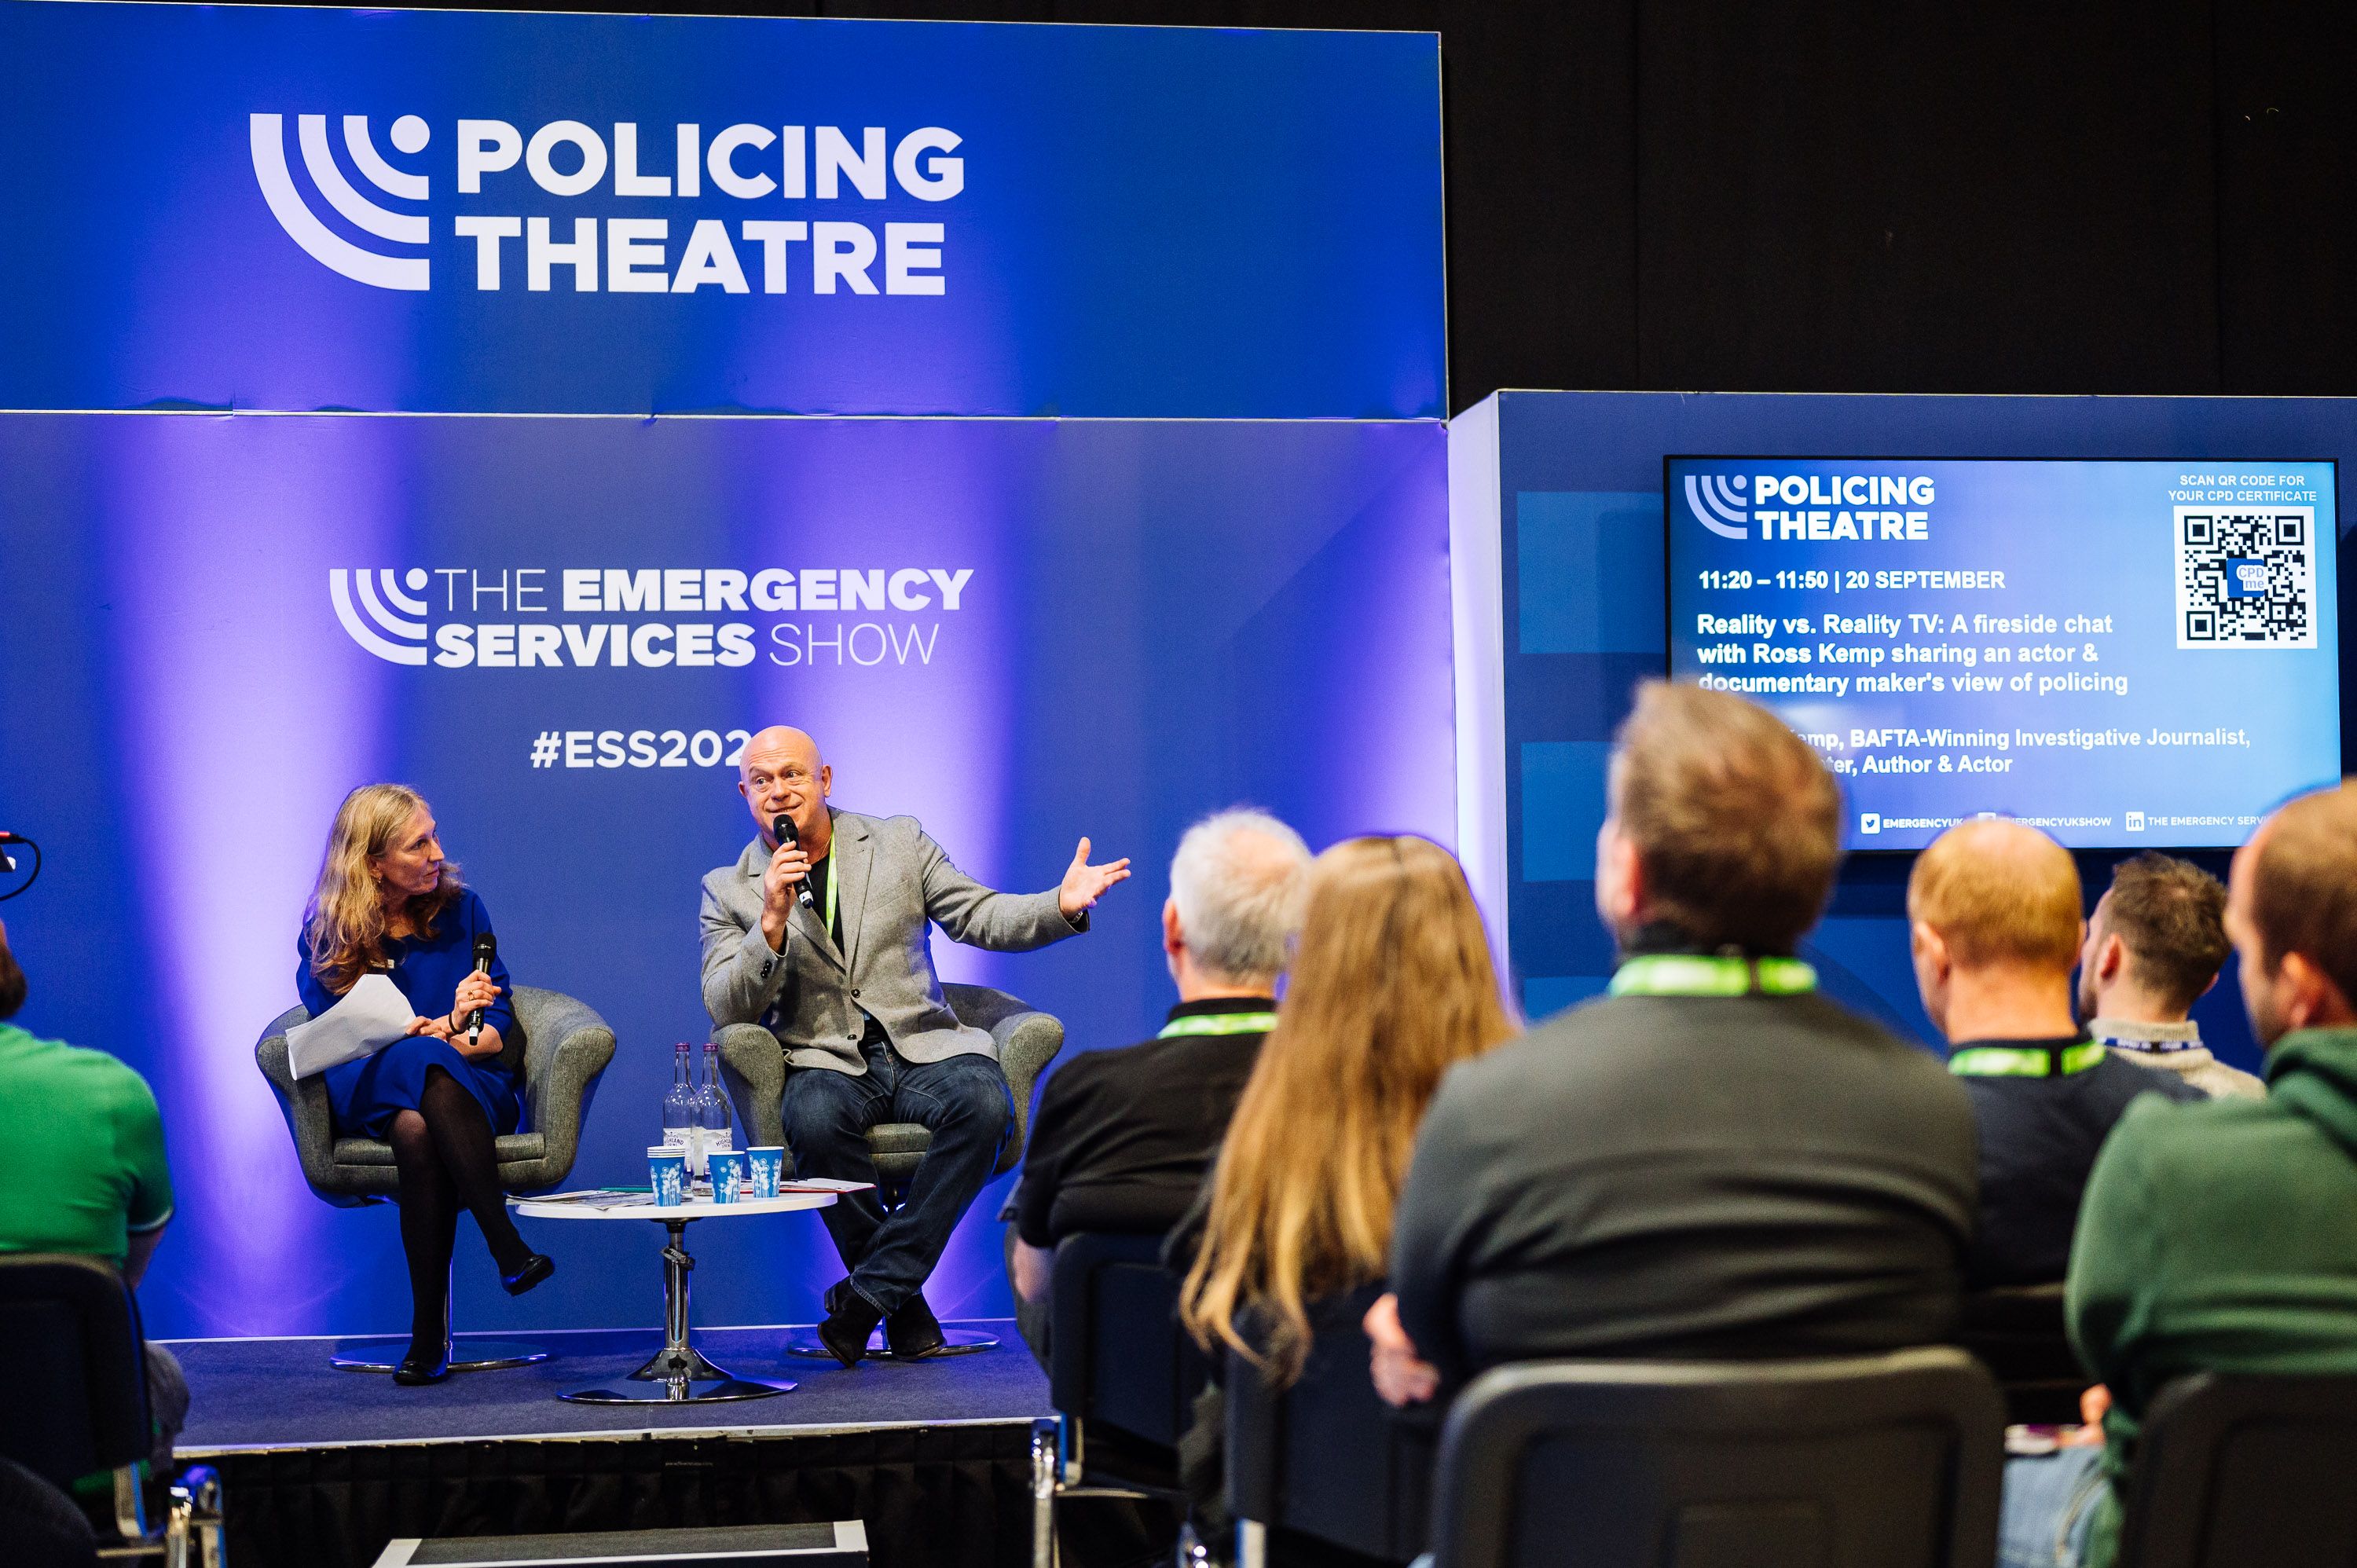 POLICING THEATRE